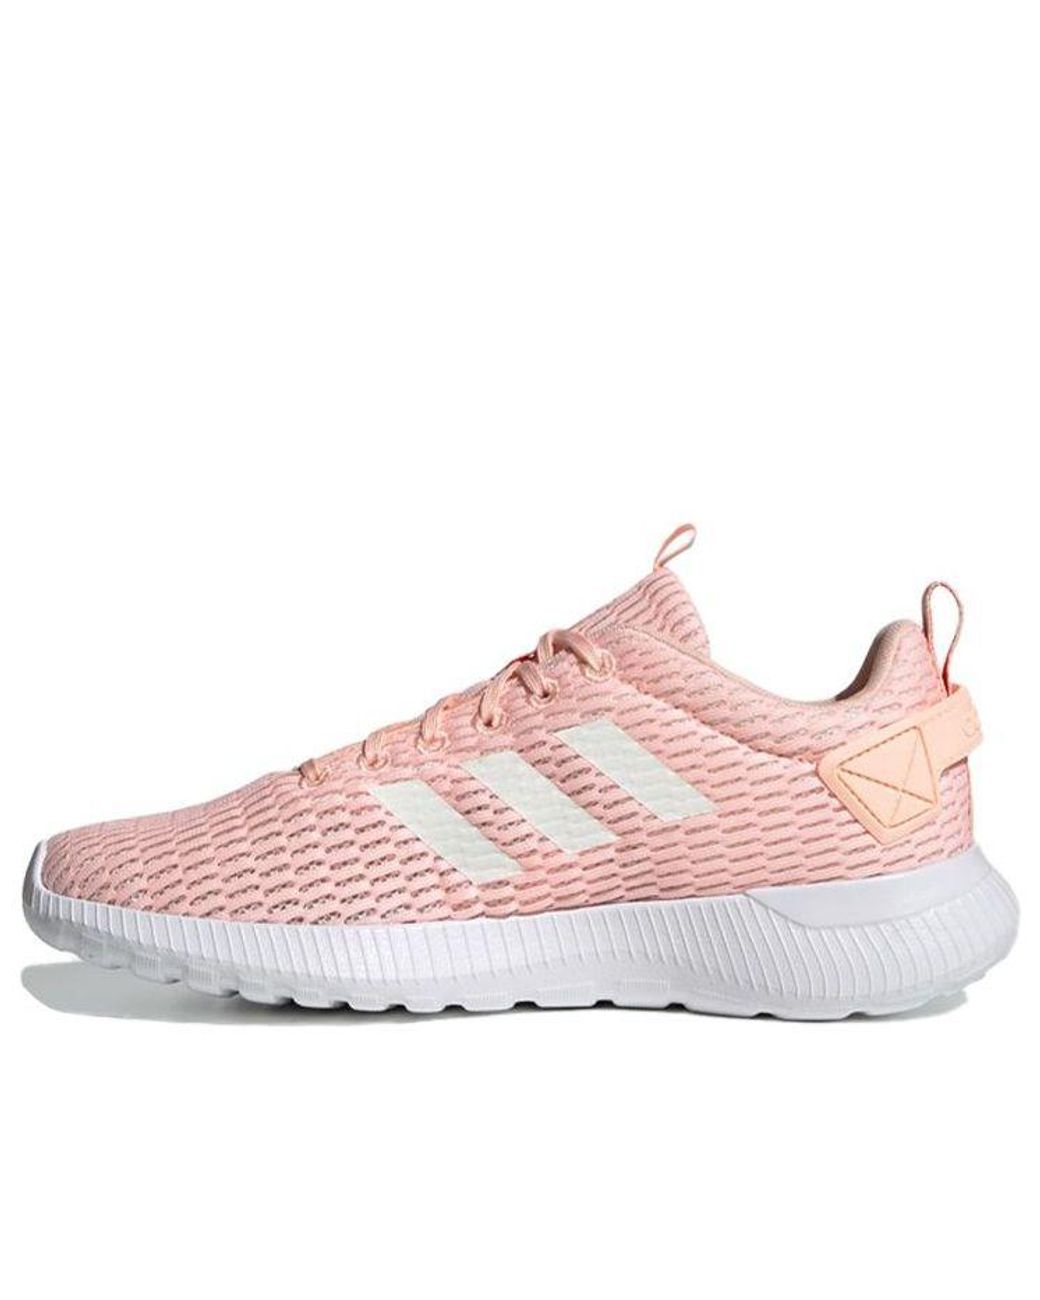 Adidas Neo Adidas Didas Neo Cloudfoam Lite Racer Climacool in Pink | Lyst